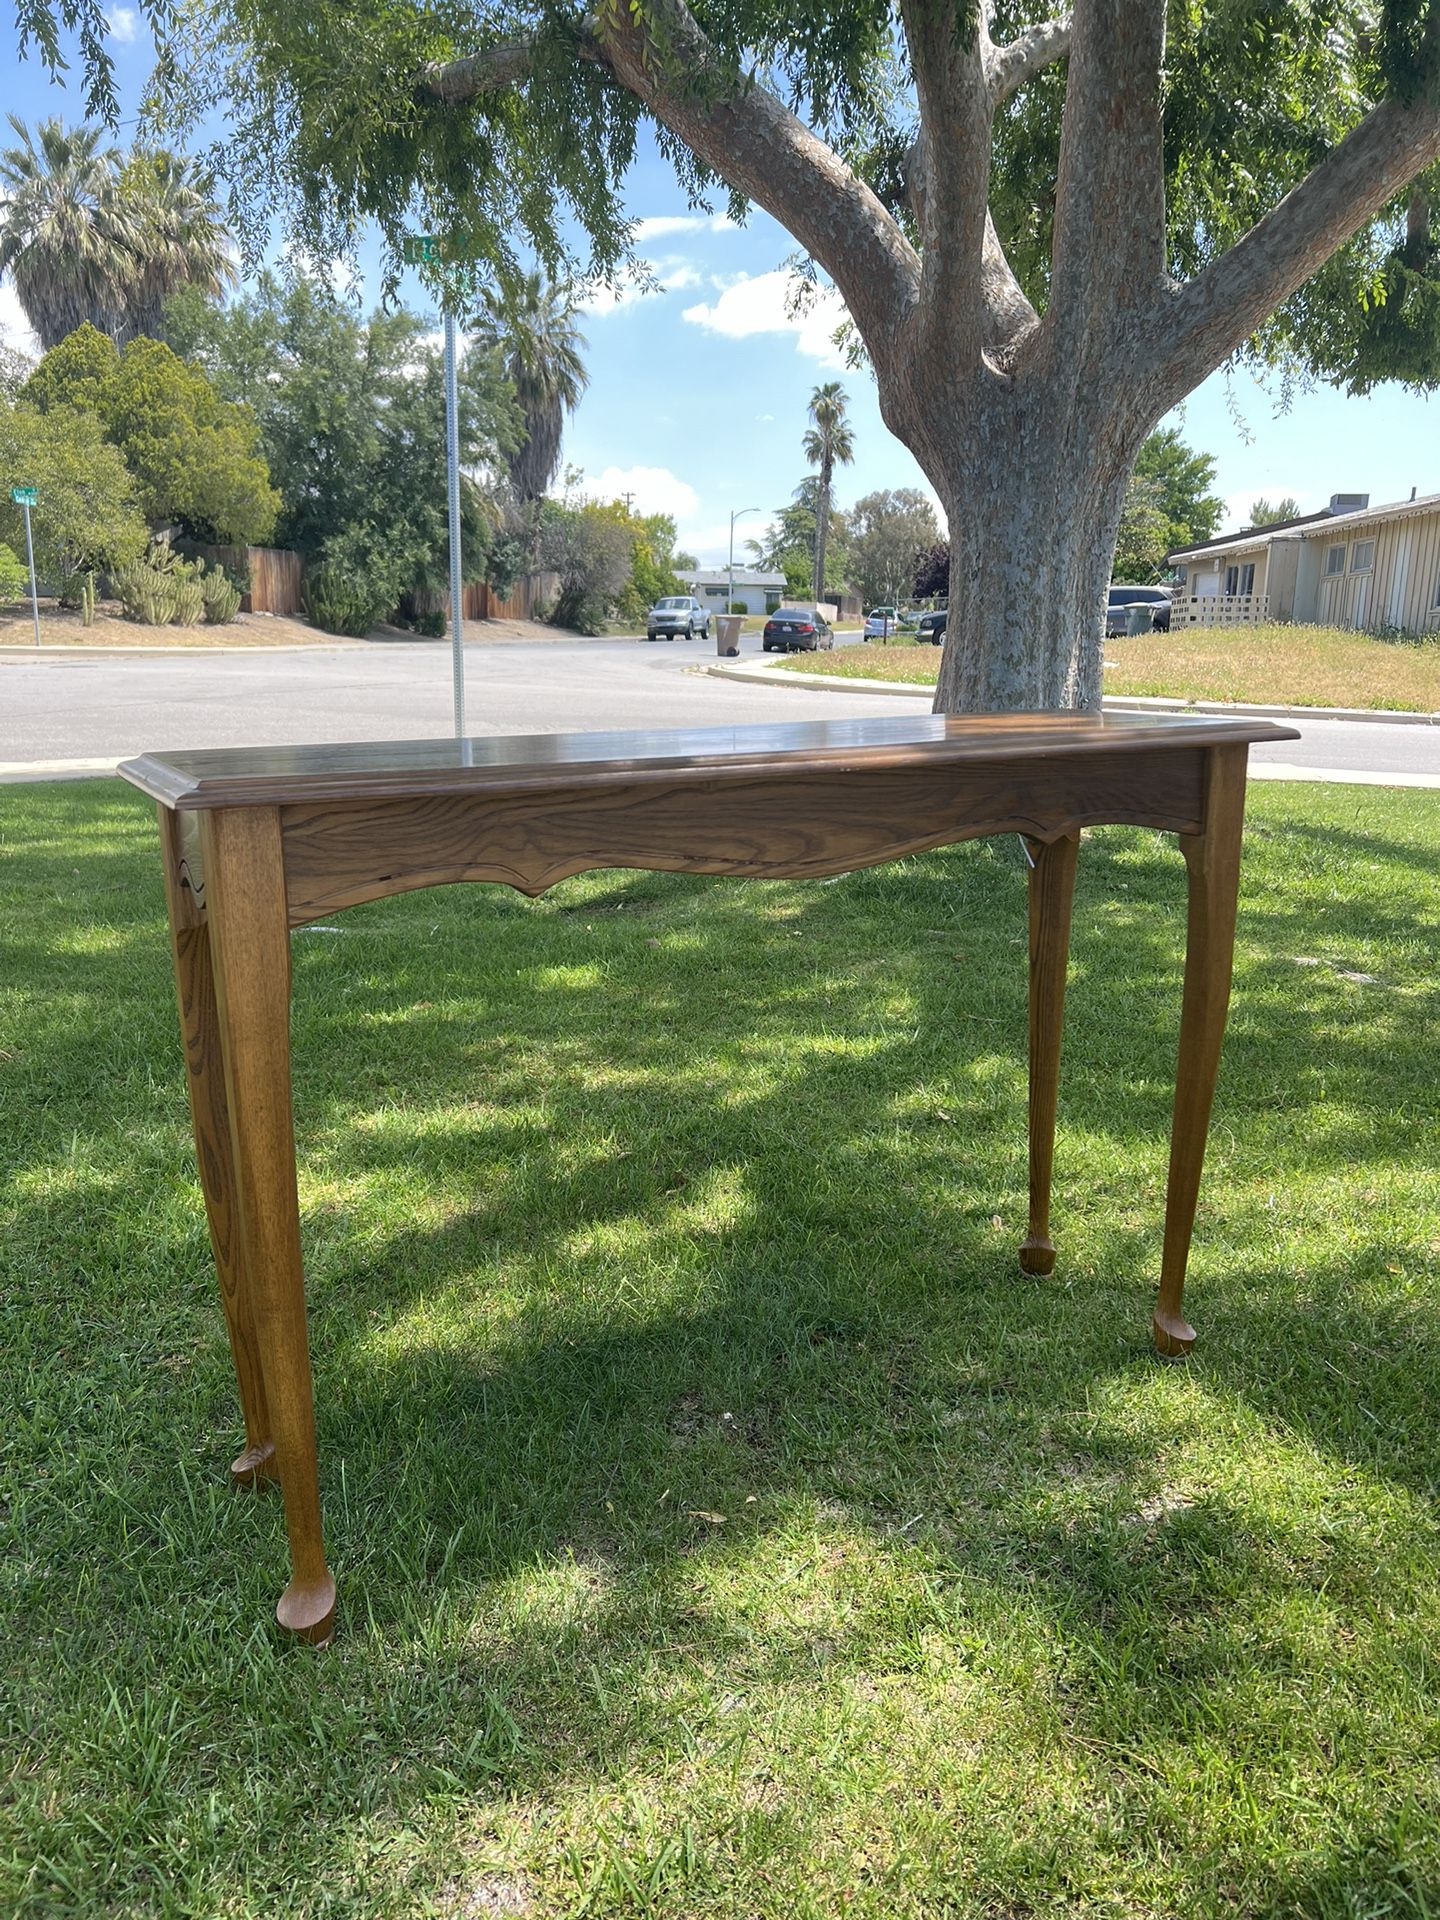 Vintage Oak Console Table ( Entry Table Not A Very Large Table)